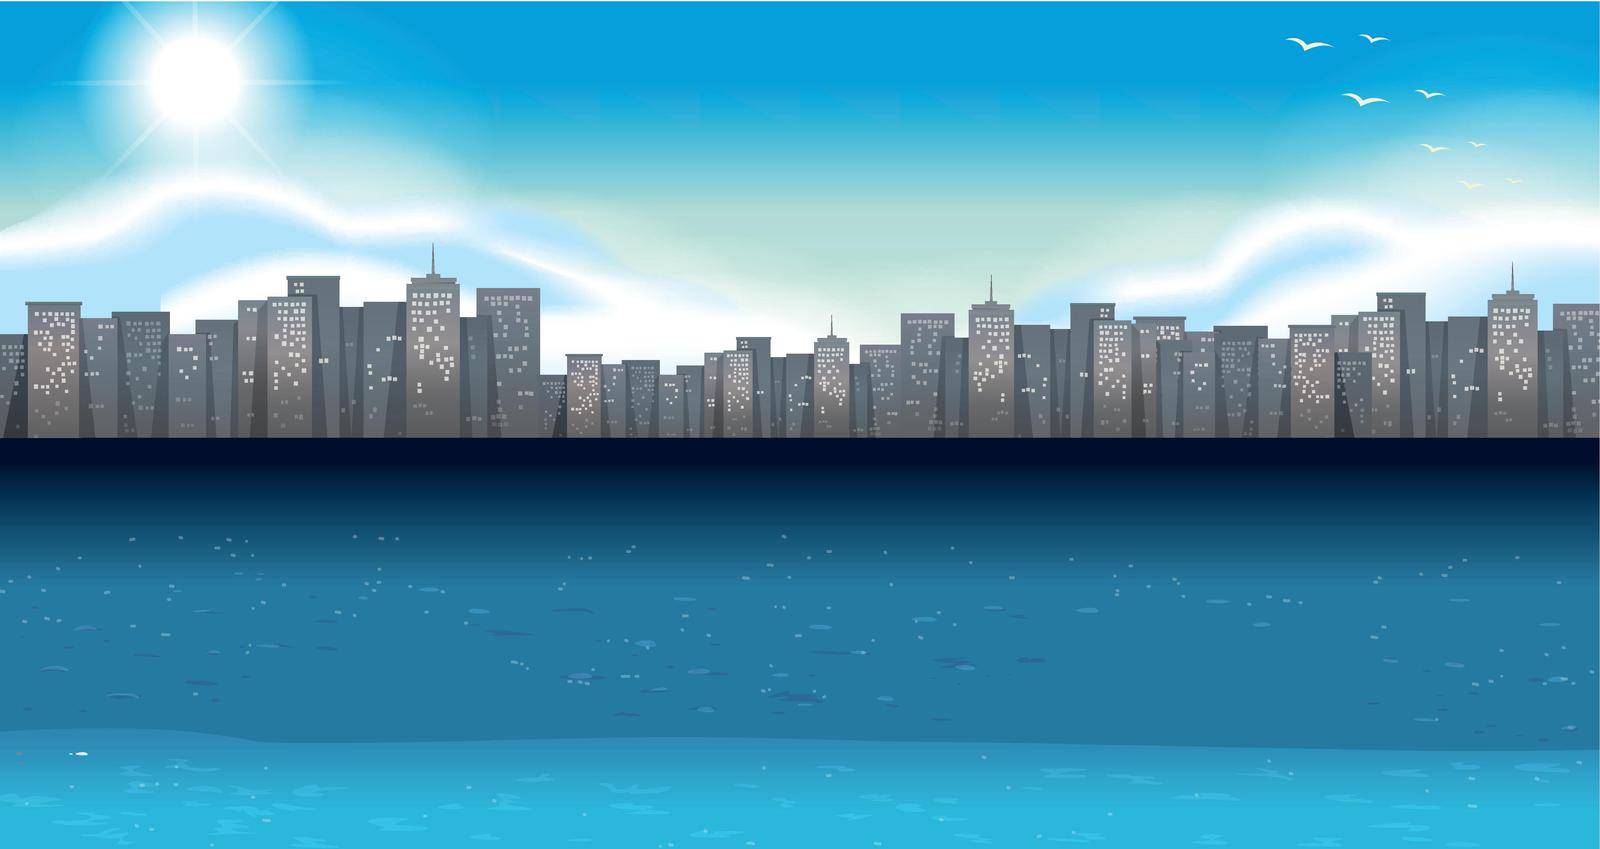 Ocean scene with buildings in background illustration